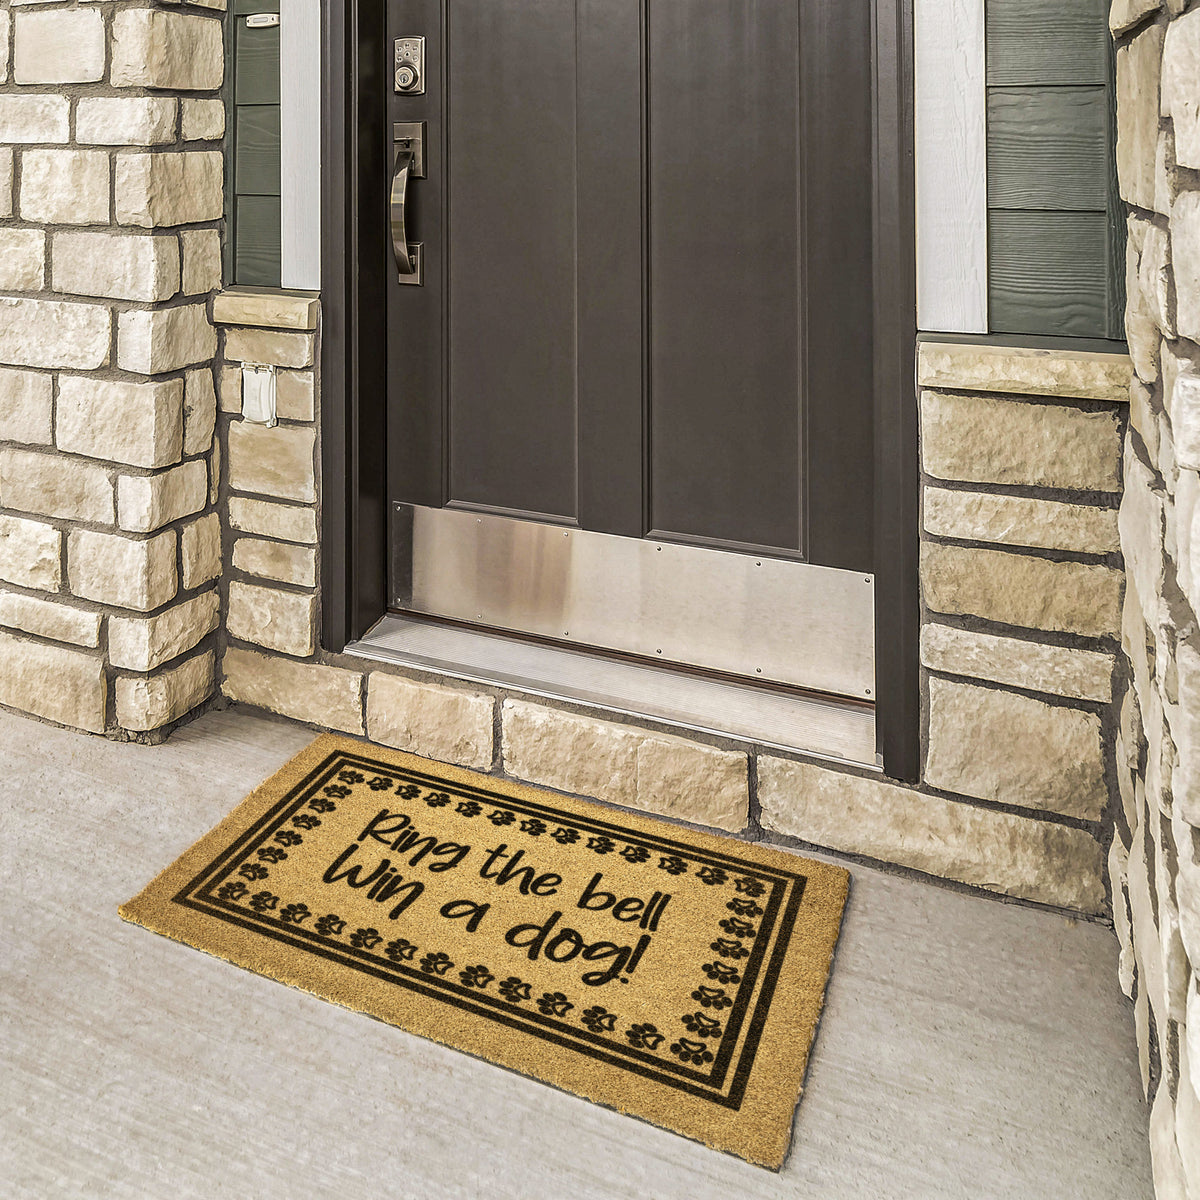 Ring the bell Win a Dog Coir Welcome Doormat - 3 Red Rovers